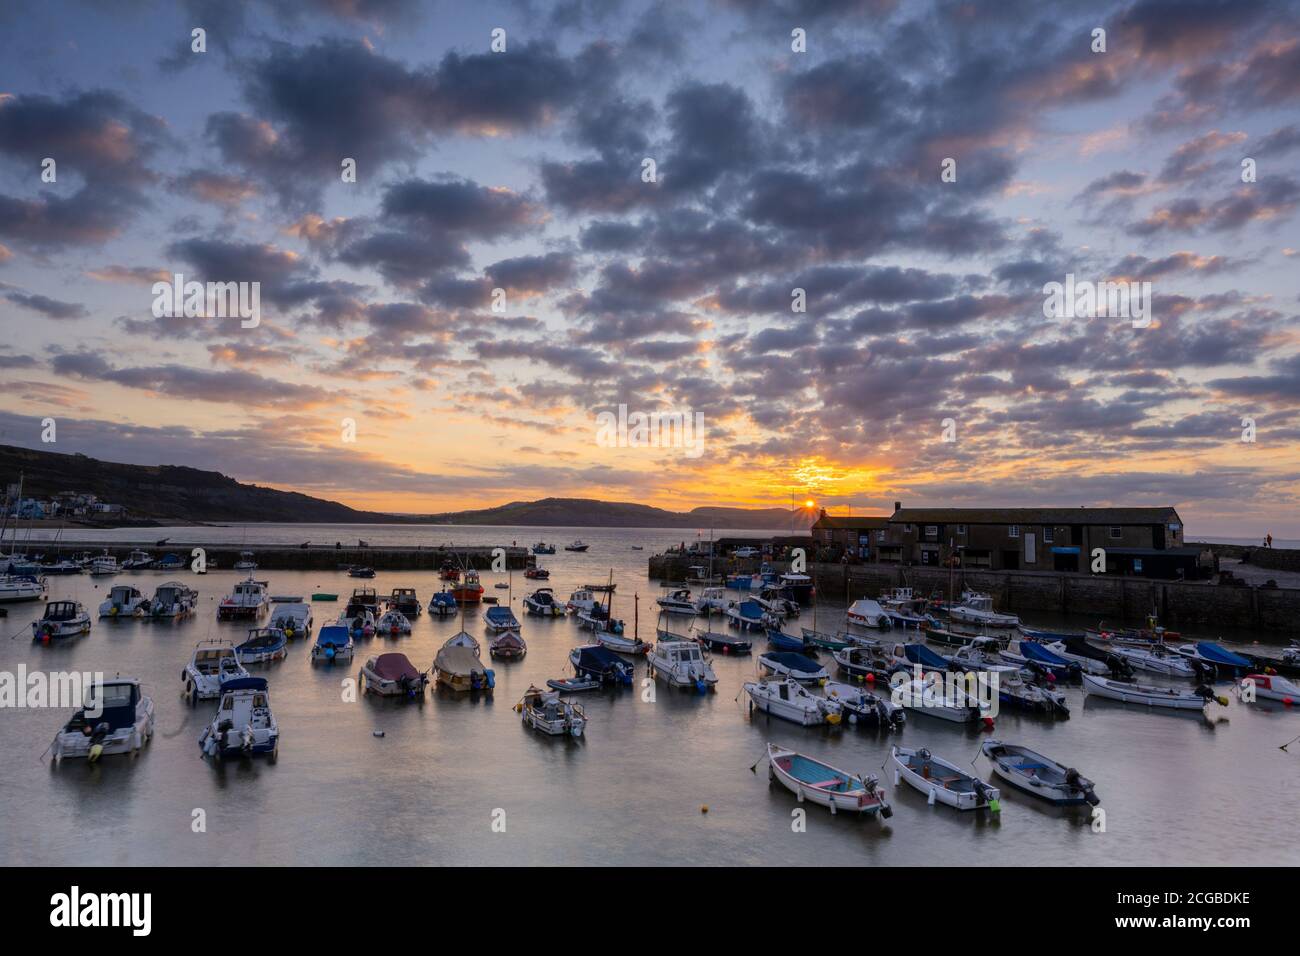 Lyme Regis, Dorset, UK. 10th Sep, 2020. UK Weather: A beautiful autumnal sunrise on a chilly morning at the coastal resort of Lyme Regis as high pressure moves into the region bringing dry and settled conditions ahead of a prediccted mini-heatwave. Credit: Celia McMahon/Alamy Live News Stock Photo